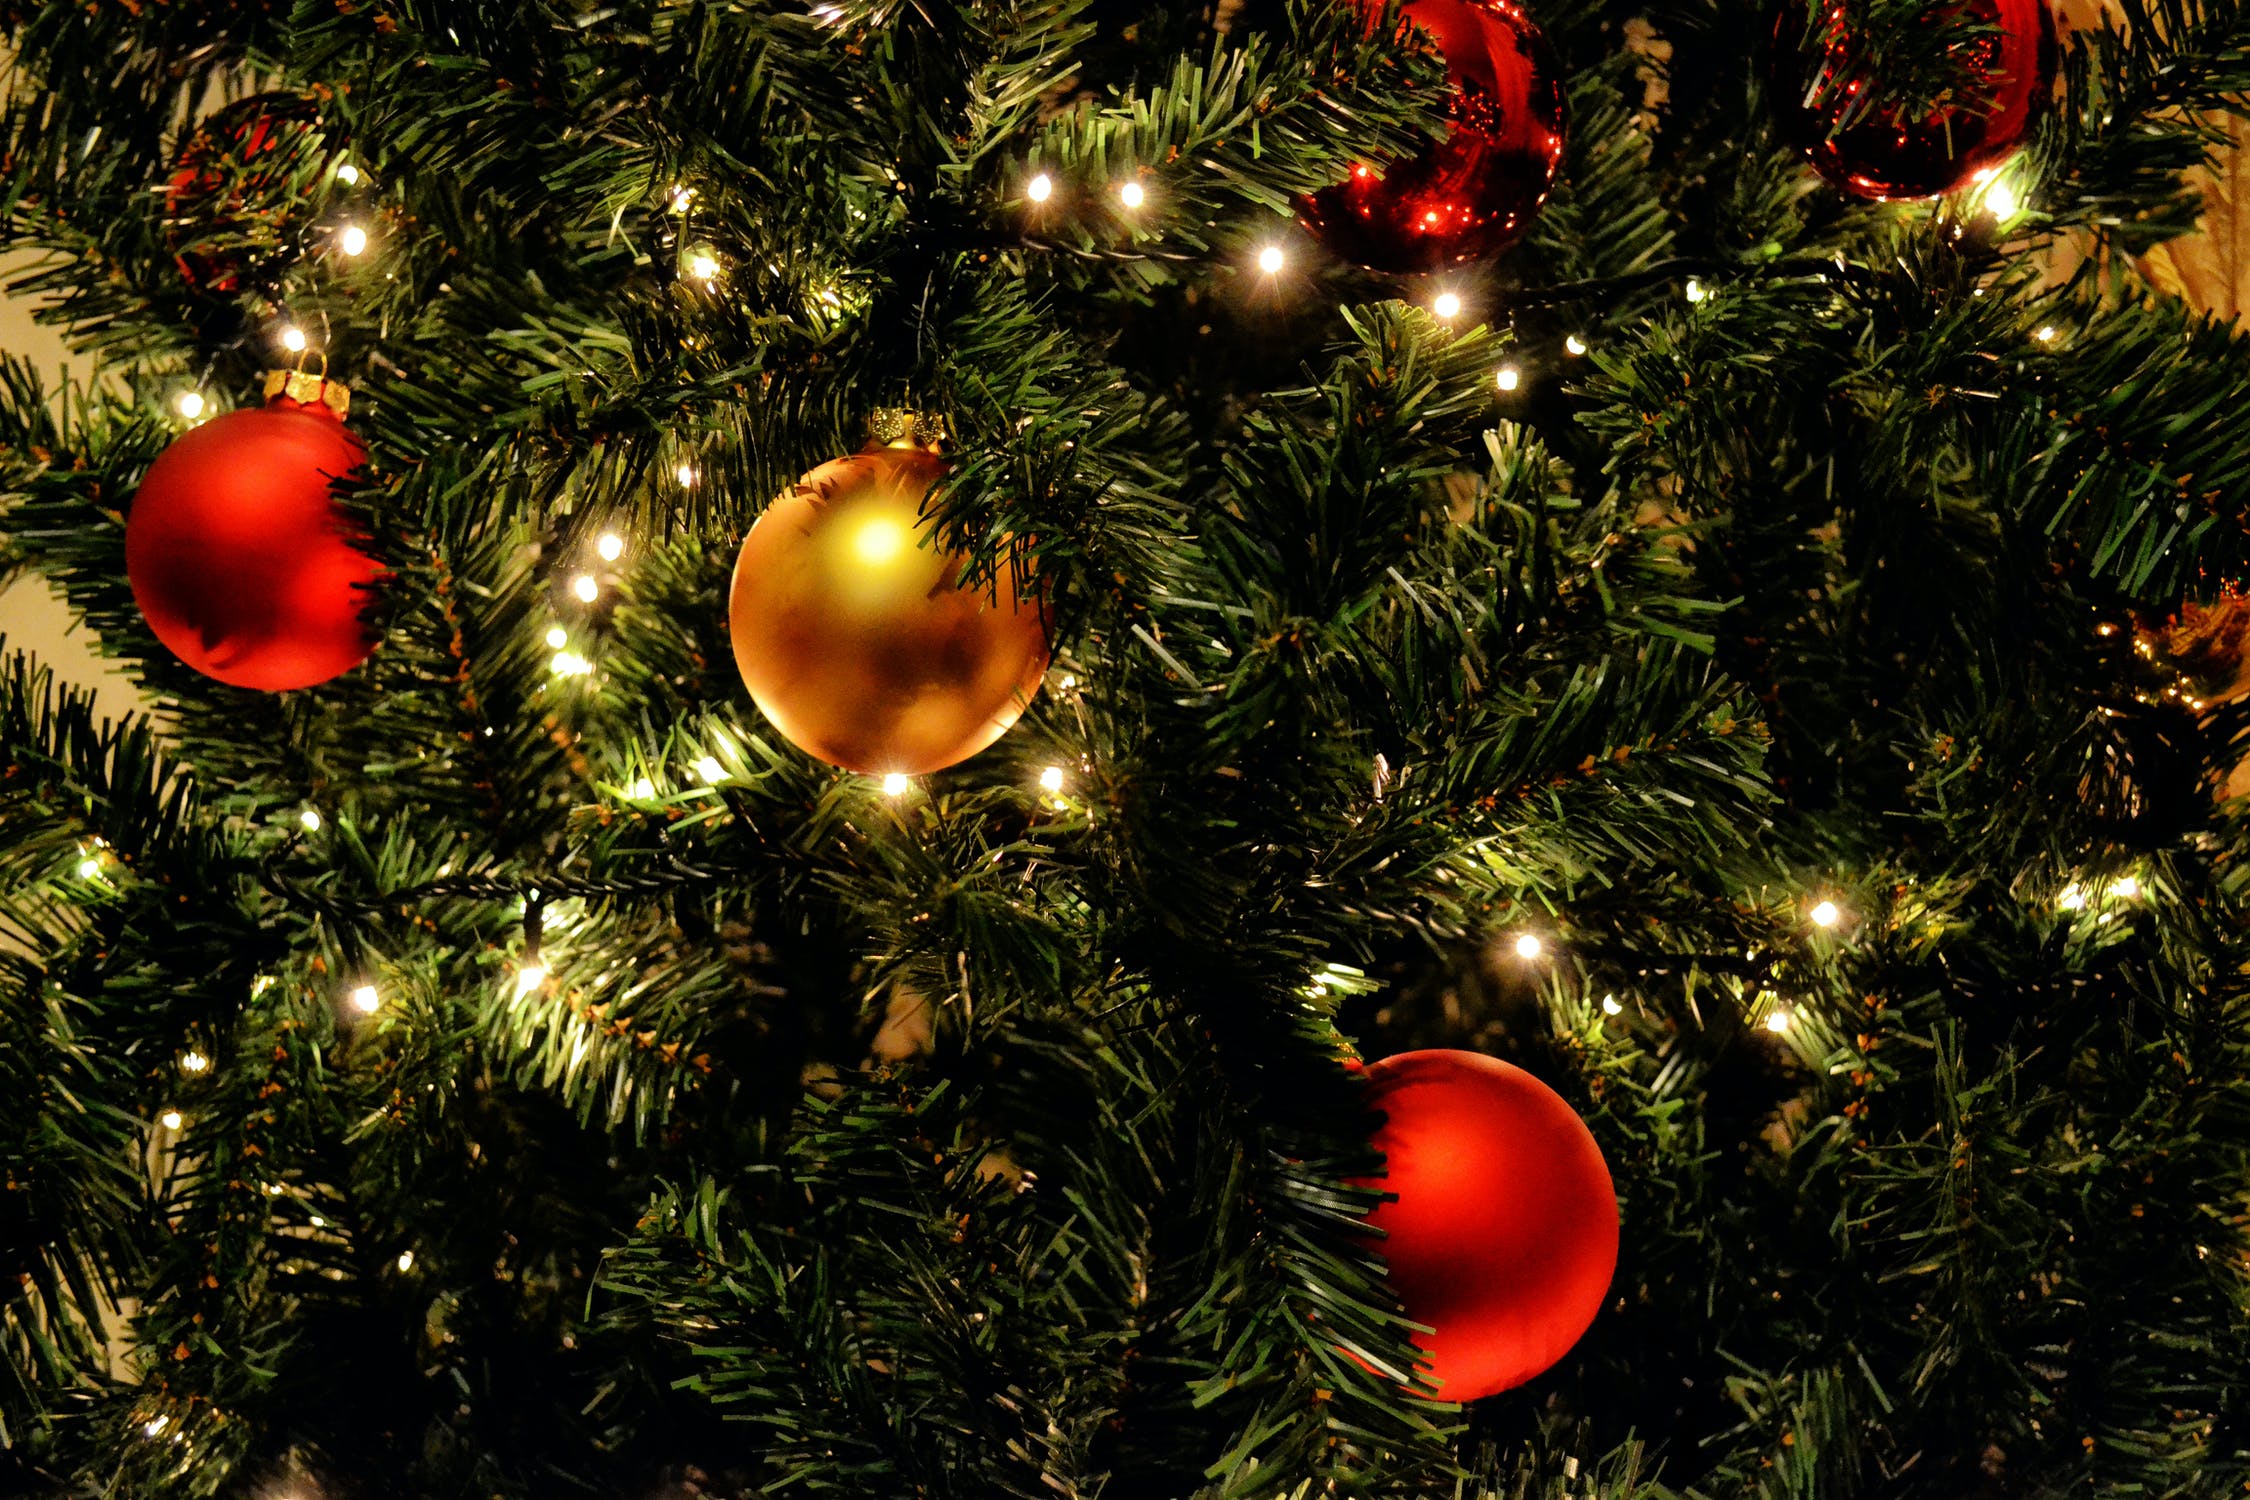 close up image of pine tree with colorful round ornaments and lights